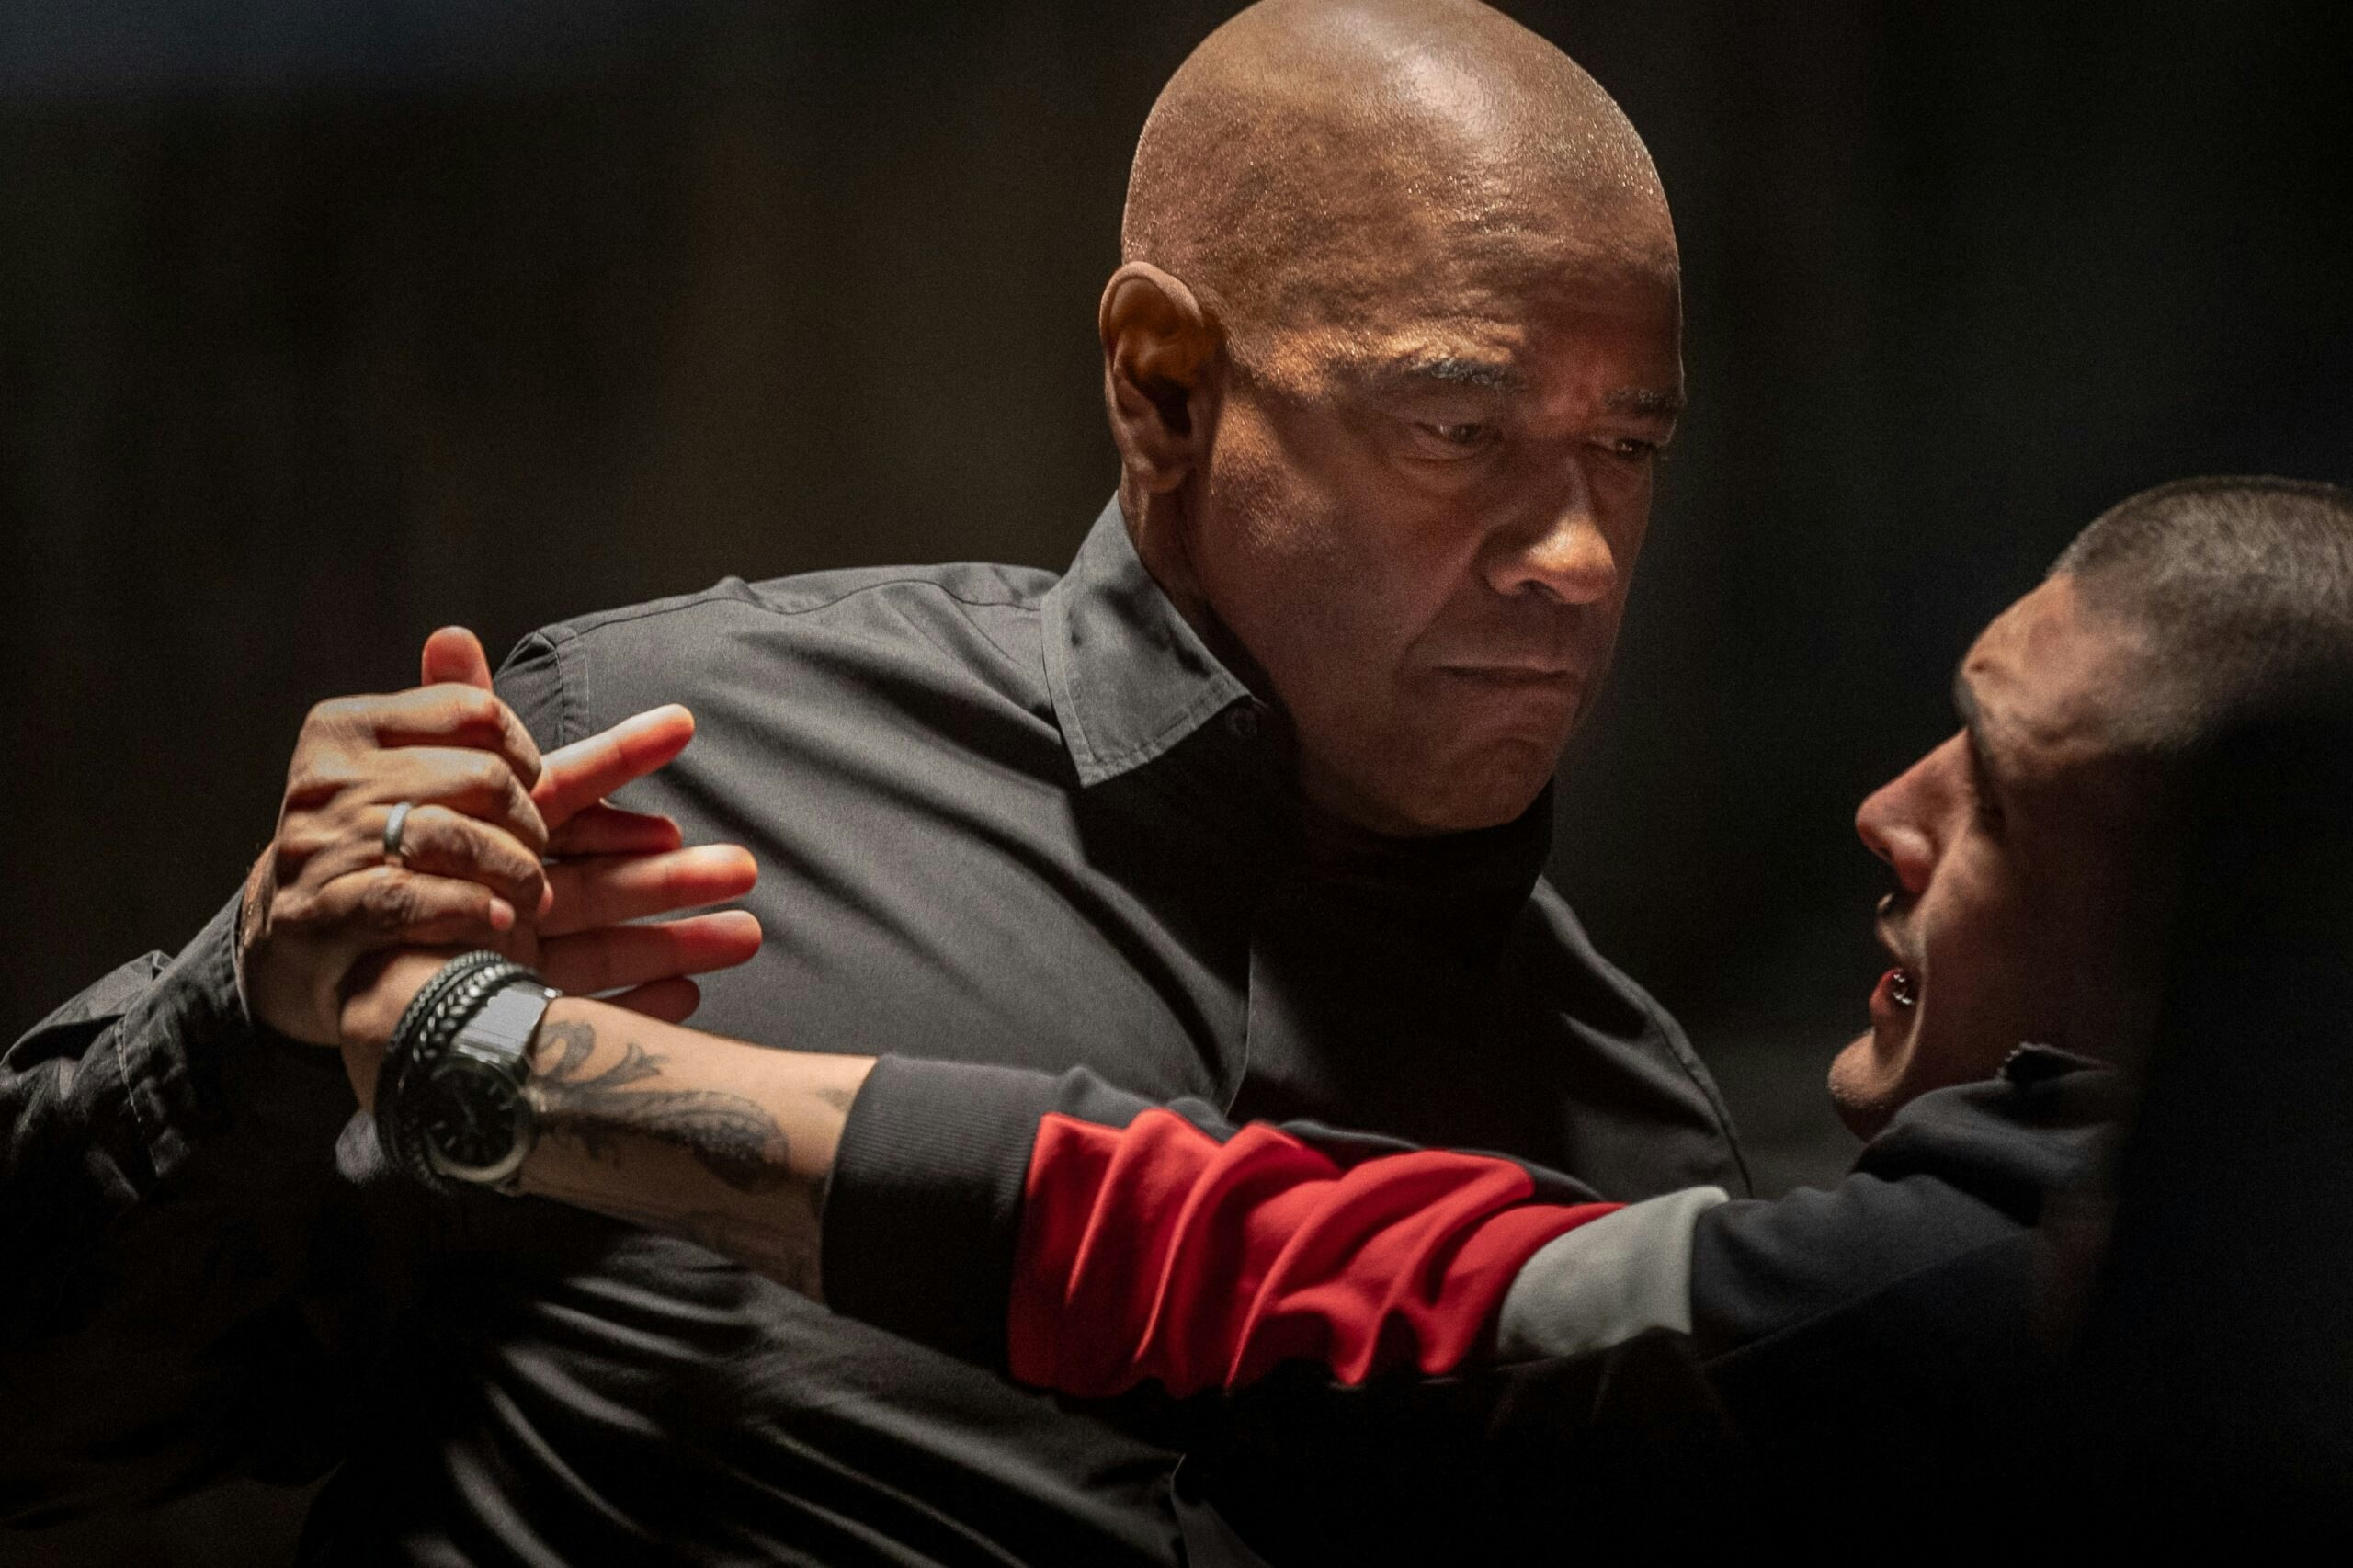 Move Review: The Equalizer 3